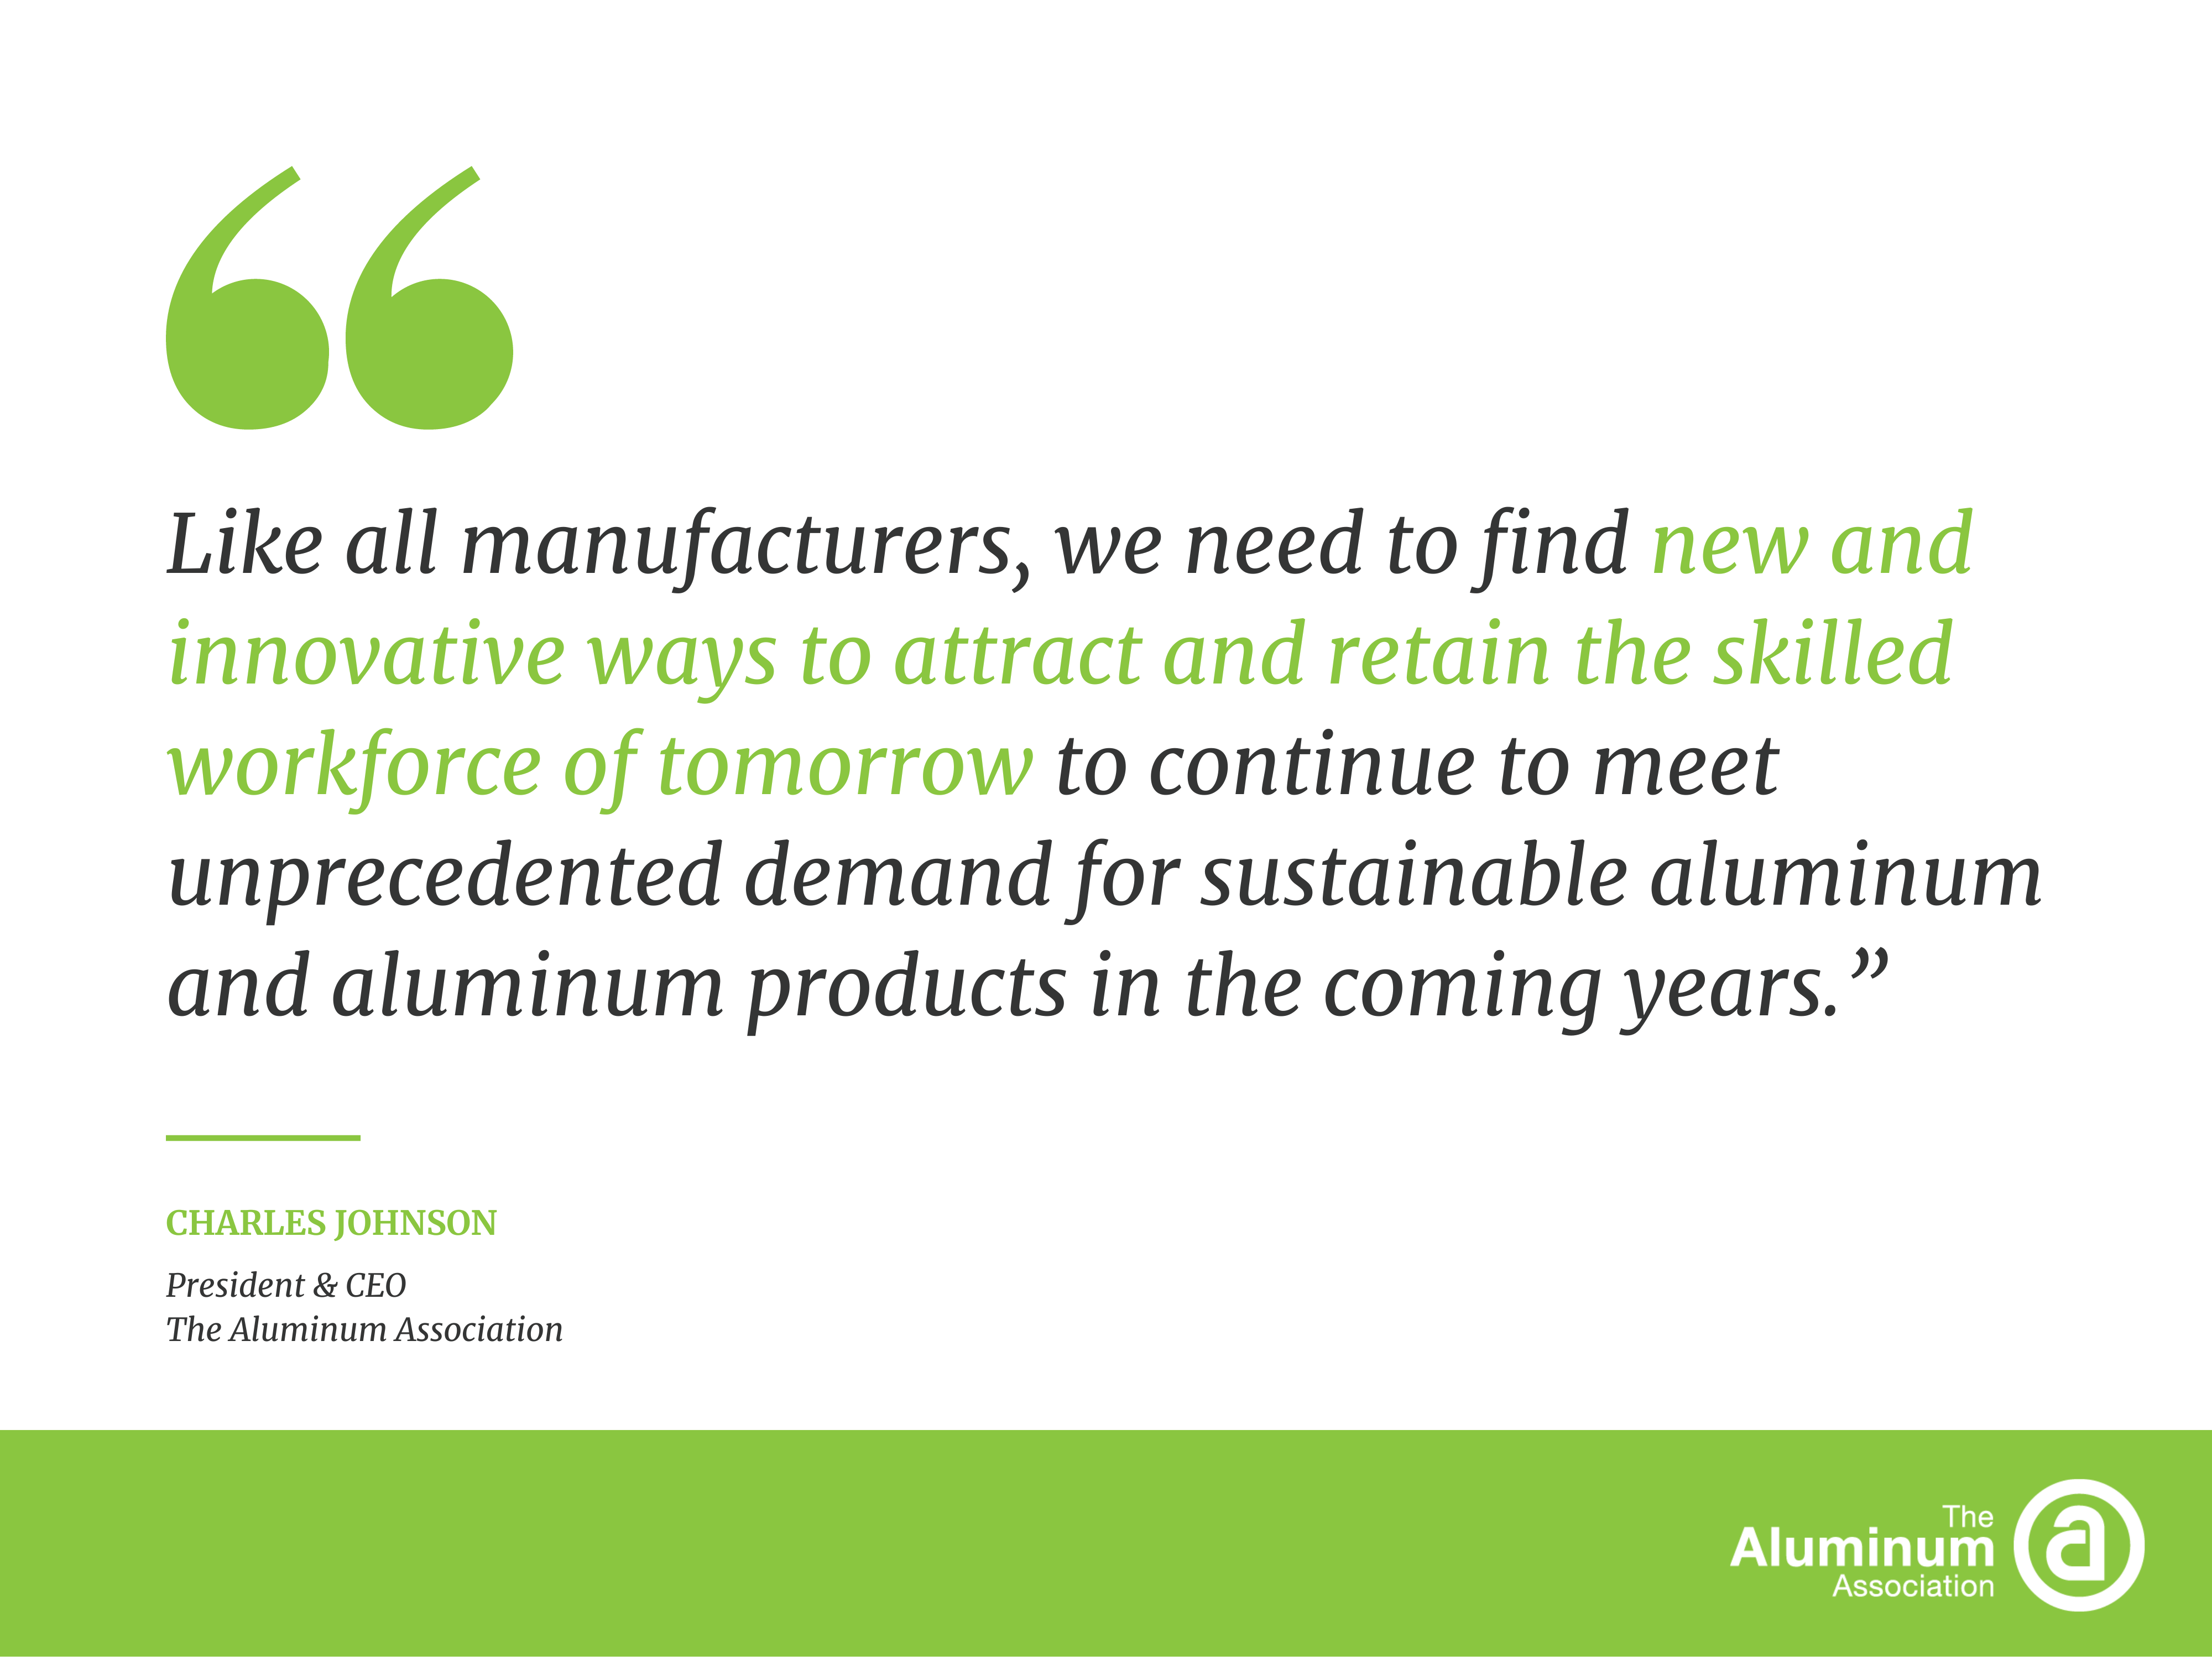 Like all manufacturers, we need to find new and innovative ways to attract and retain the skilled workforce of tomorrow to continue to meet unprecedented demand for sustainable aluminum and aluminum products in the coming years.”